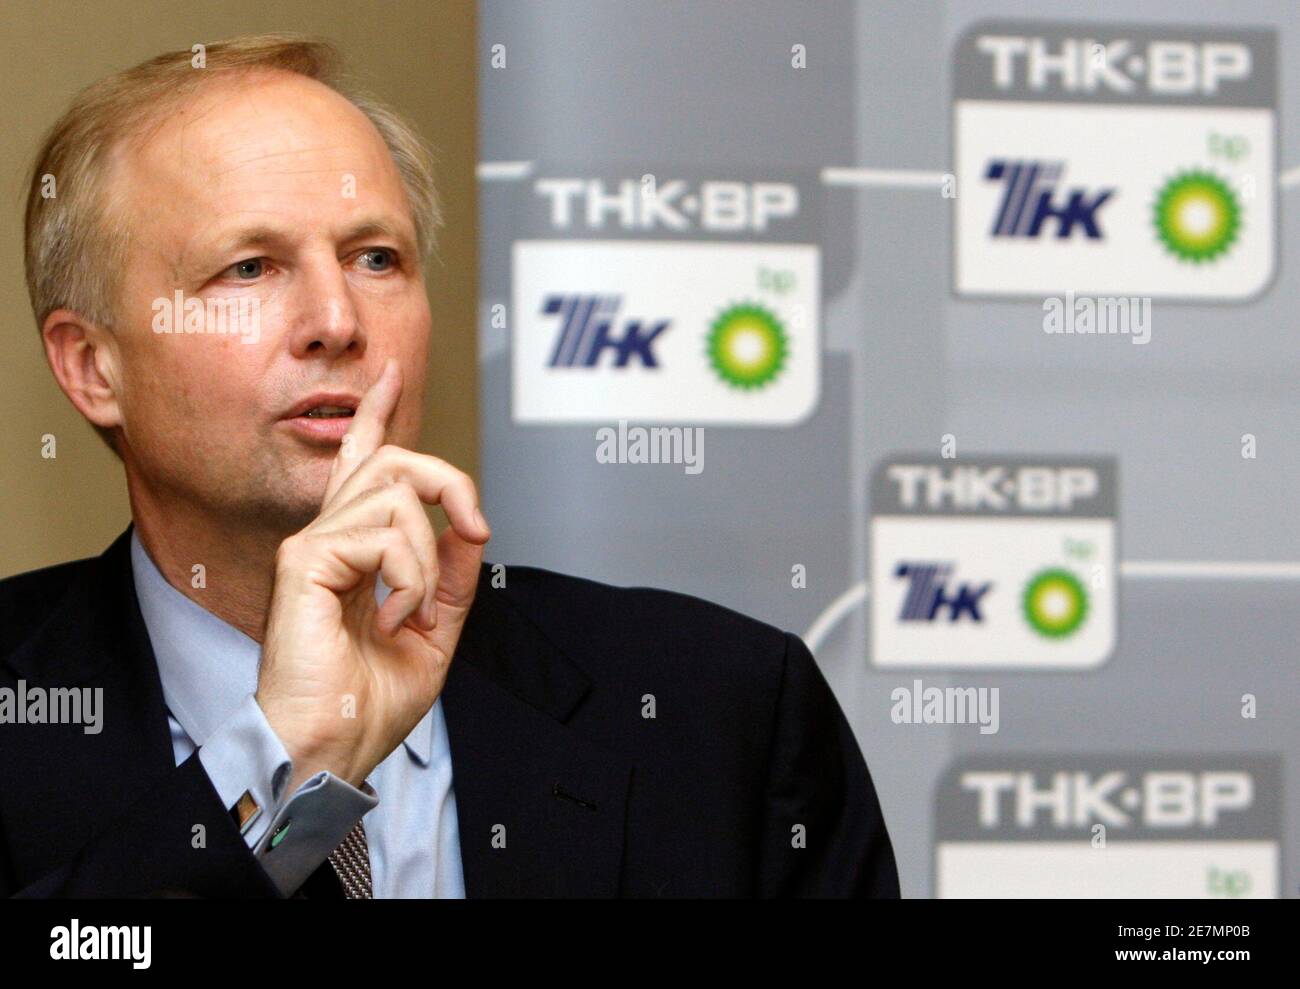 TNK-BP Chief Executive Robert Dudley speaks during a news conference in Moscow July 17, 2008. Dudley said a shareholder dispute would 'tear the company apart' after a group of employees filed a lawsuit against him in Thursday, accusing him of mismanaging Russia's No. 3 oil firm. REUTERS/Denis Sinyakov (RUSSIA) Stock Photo